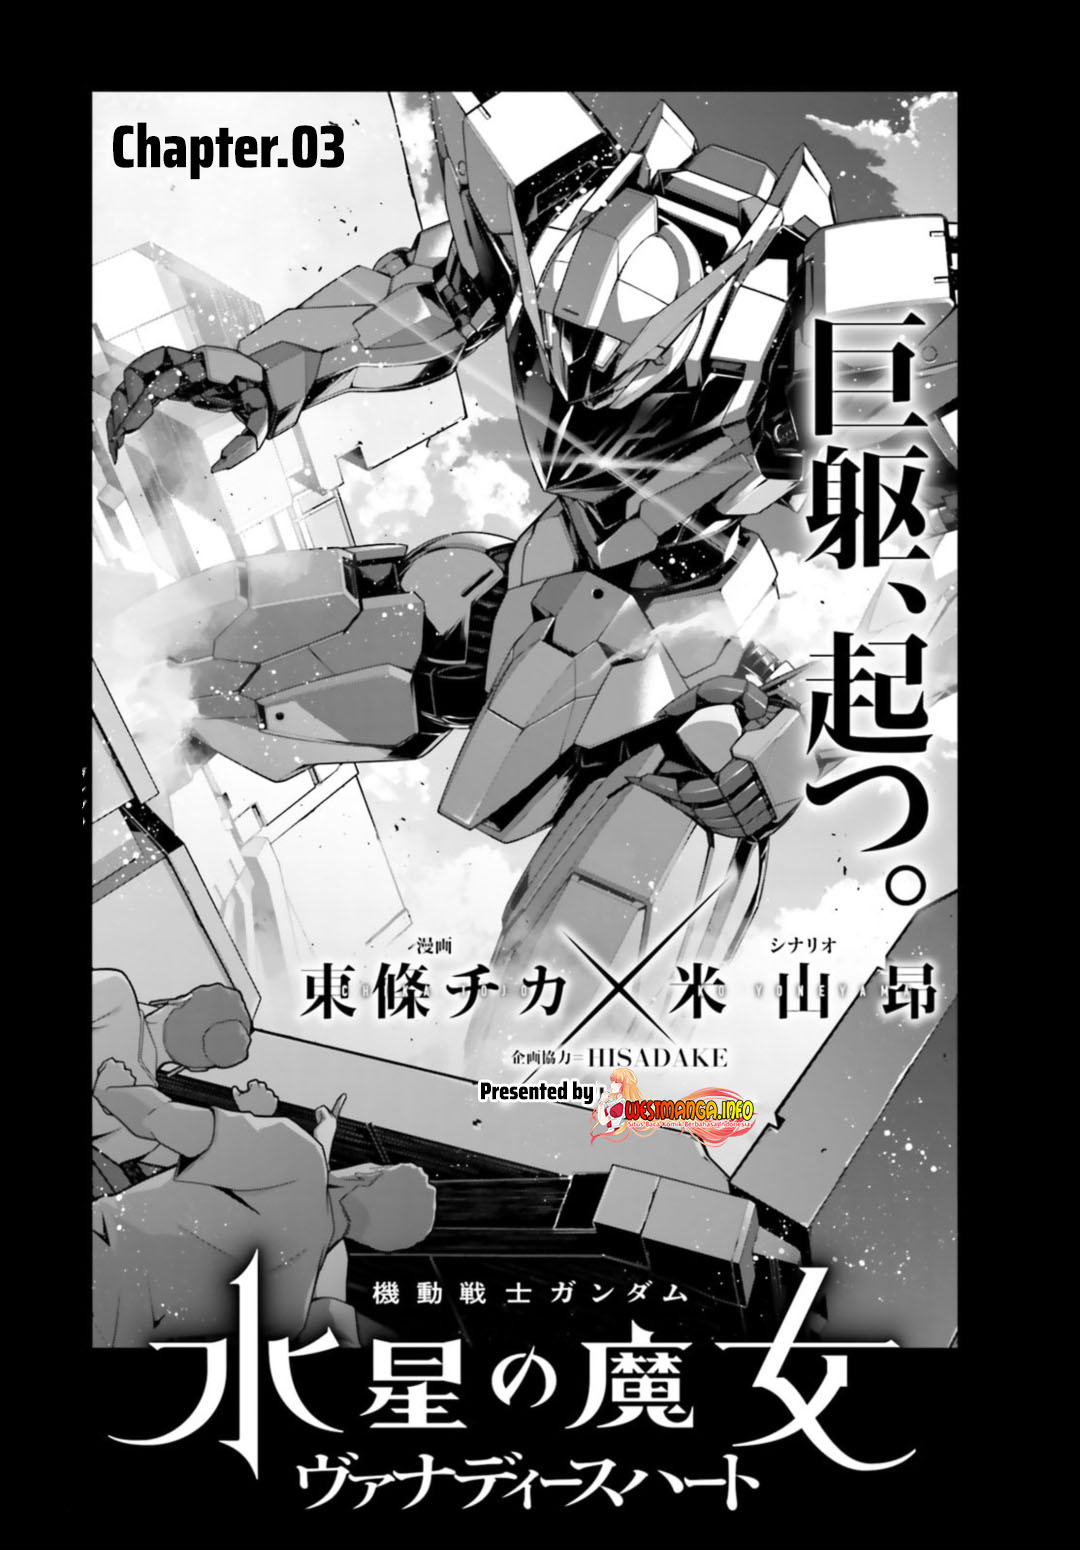 Mobile Suit Gundam The Witch From Mercury Vanadis Heart Chapter 3